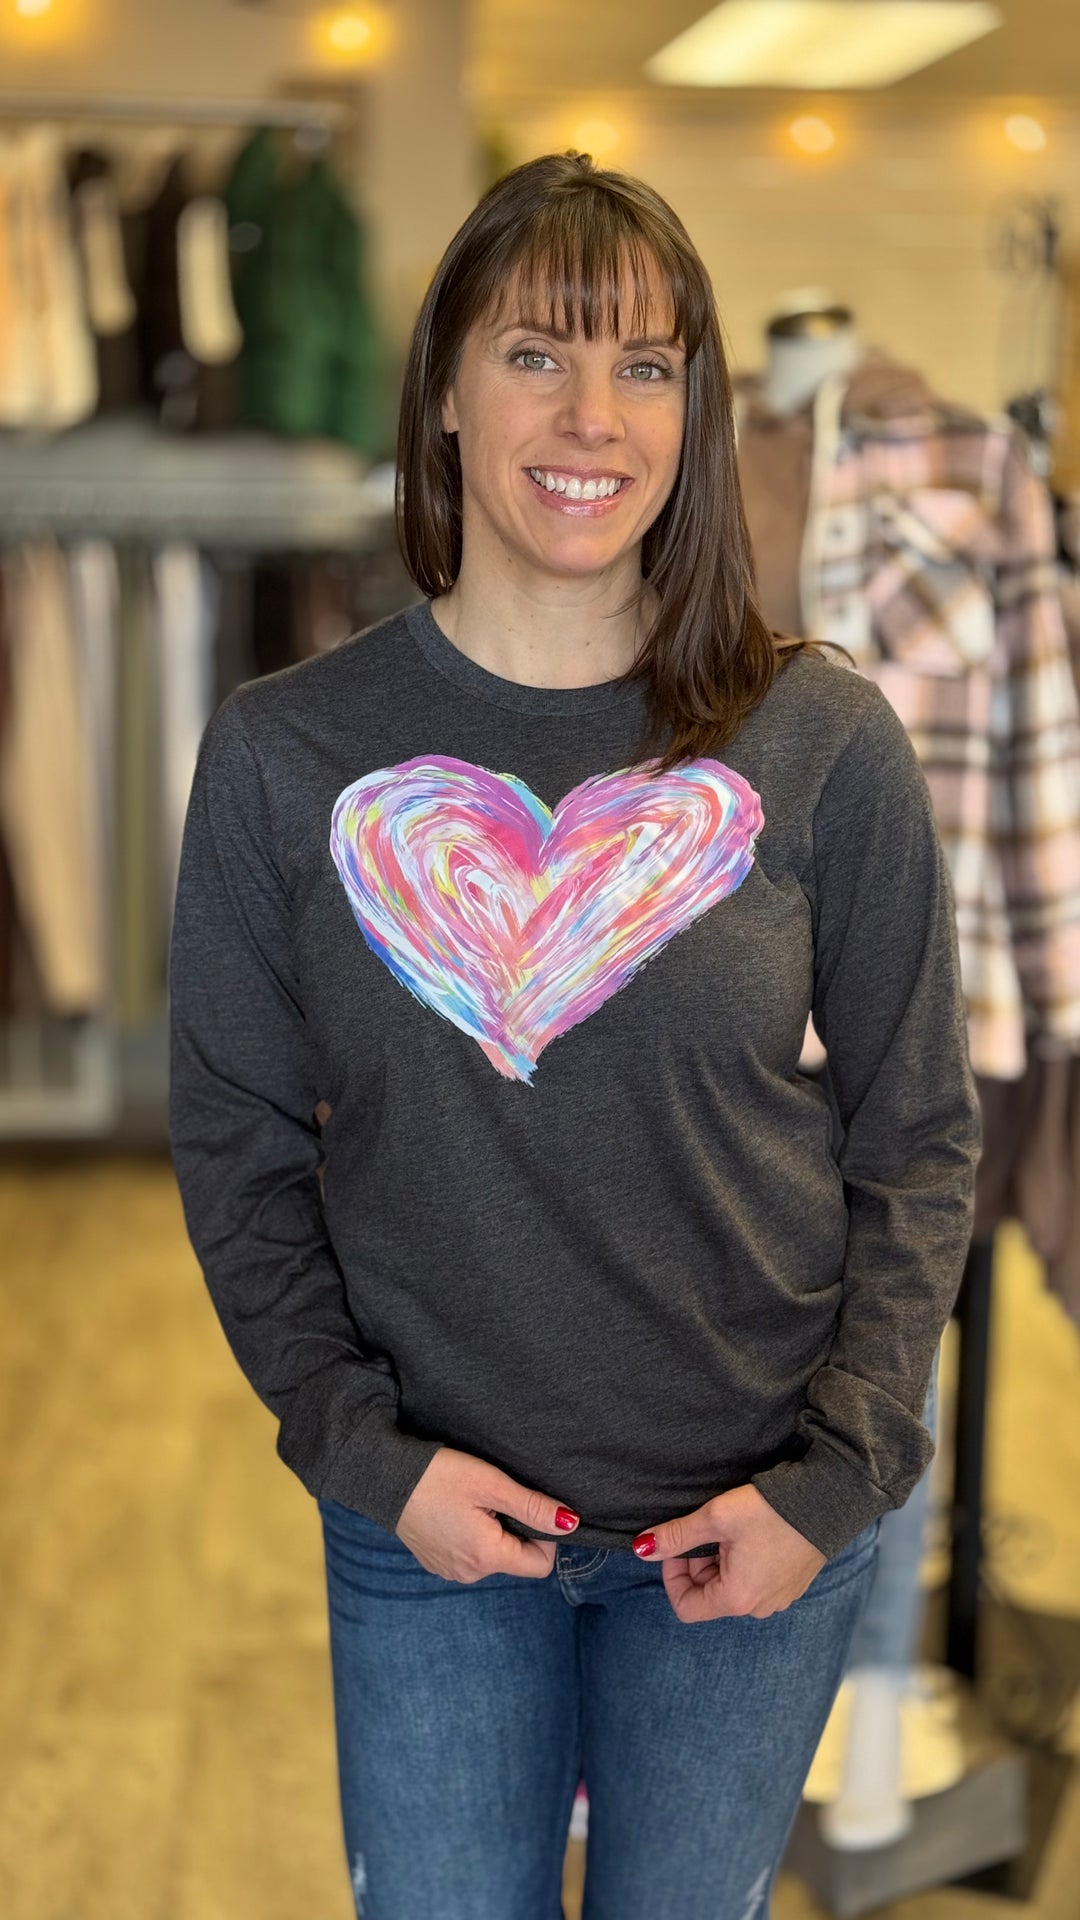 Colorful Heart Long Sleeve Shirt - Valentine's Day Shirt-Long Sleeves-The Shirt Company-Evergreen Boutique, Women’s Fashion Boutique in Santa Claus, Indiana